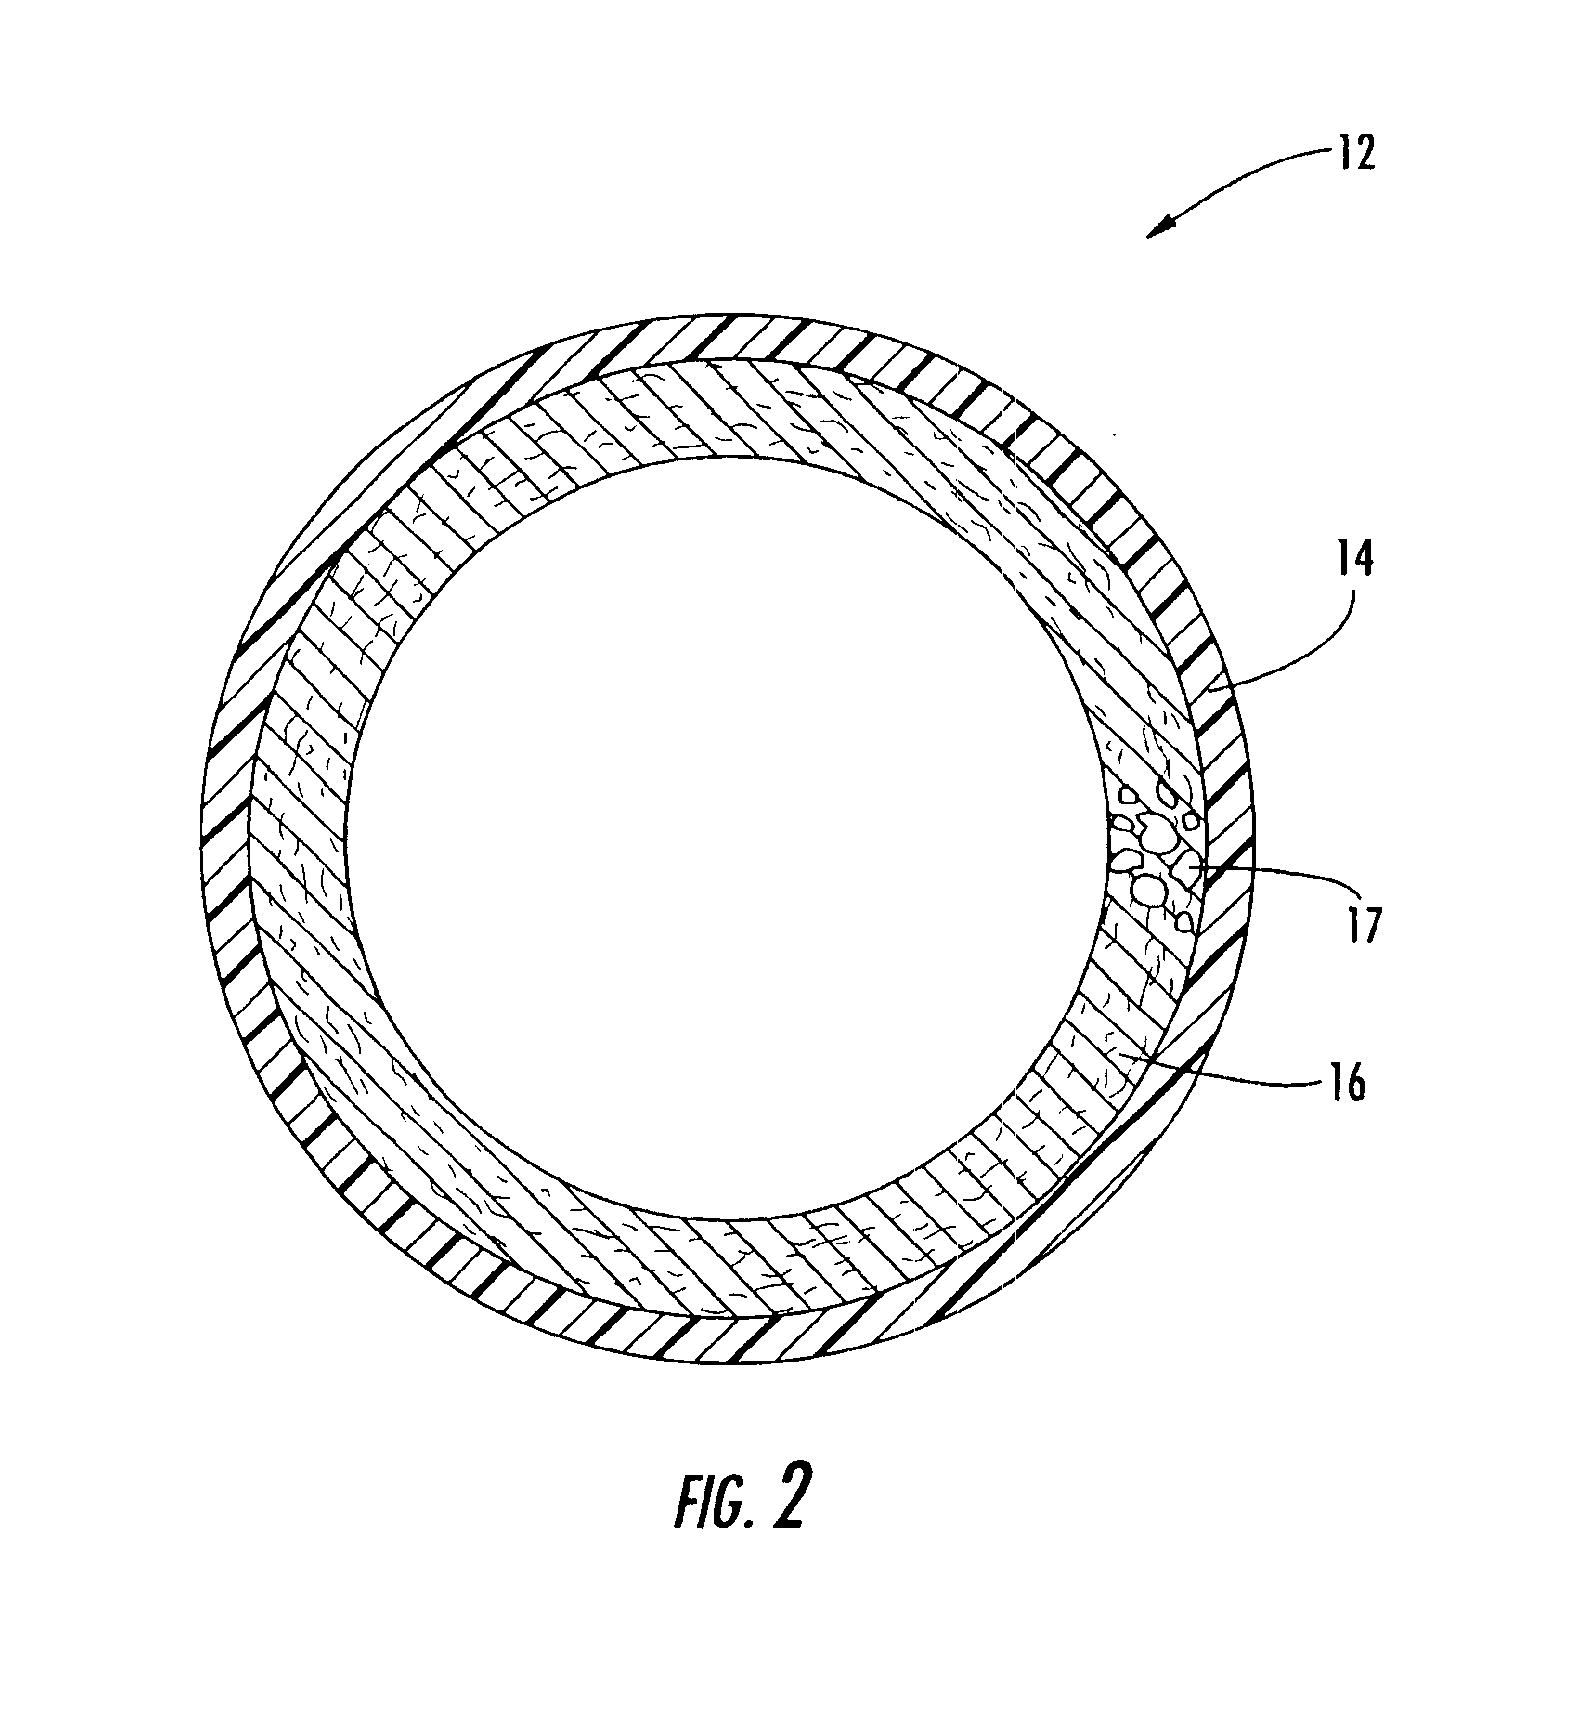 Method of lining a pipeline using a calibration hose